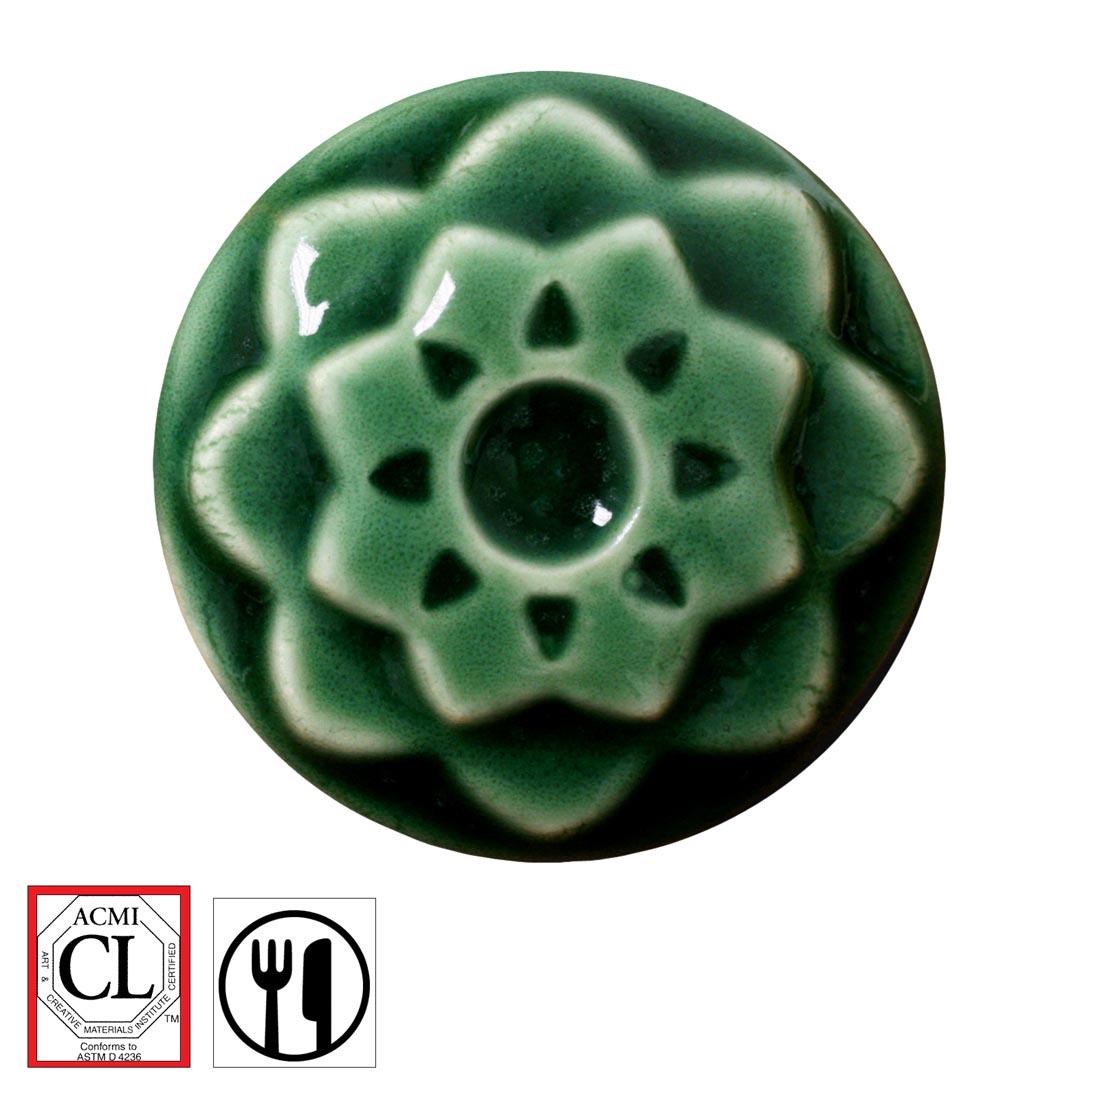 clay chip with Jade AMACO Celadon High Fire Transparent Gloss Glaze applied; symbols for Cautionary Label and food safe